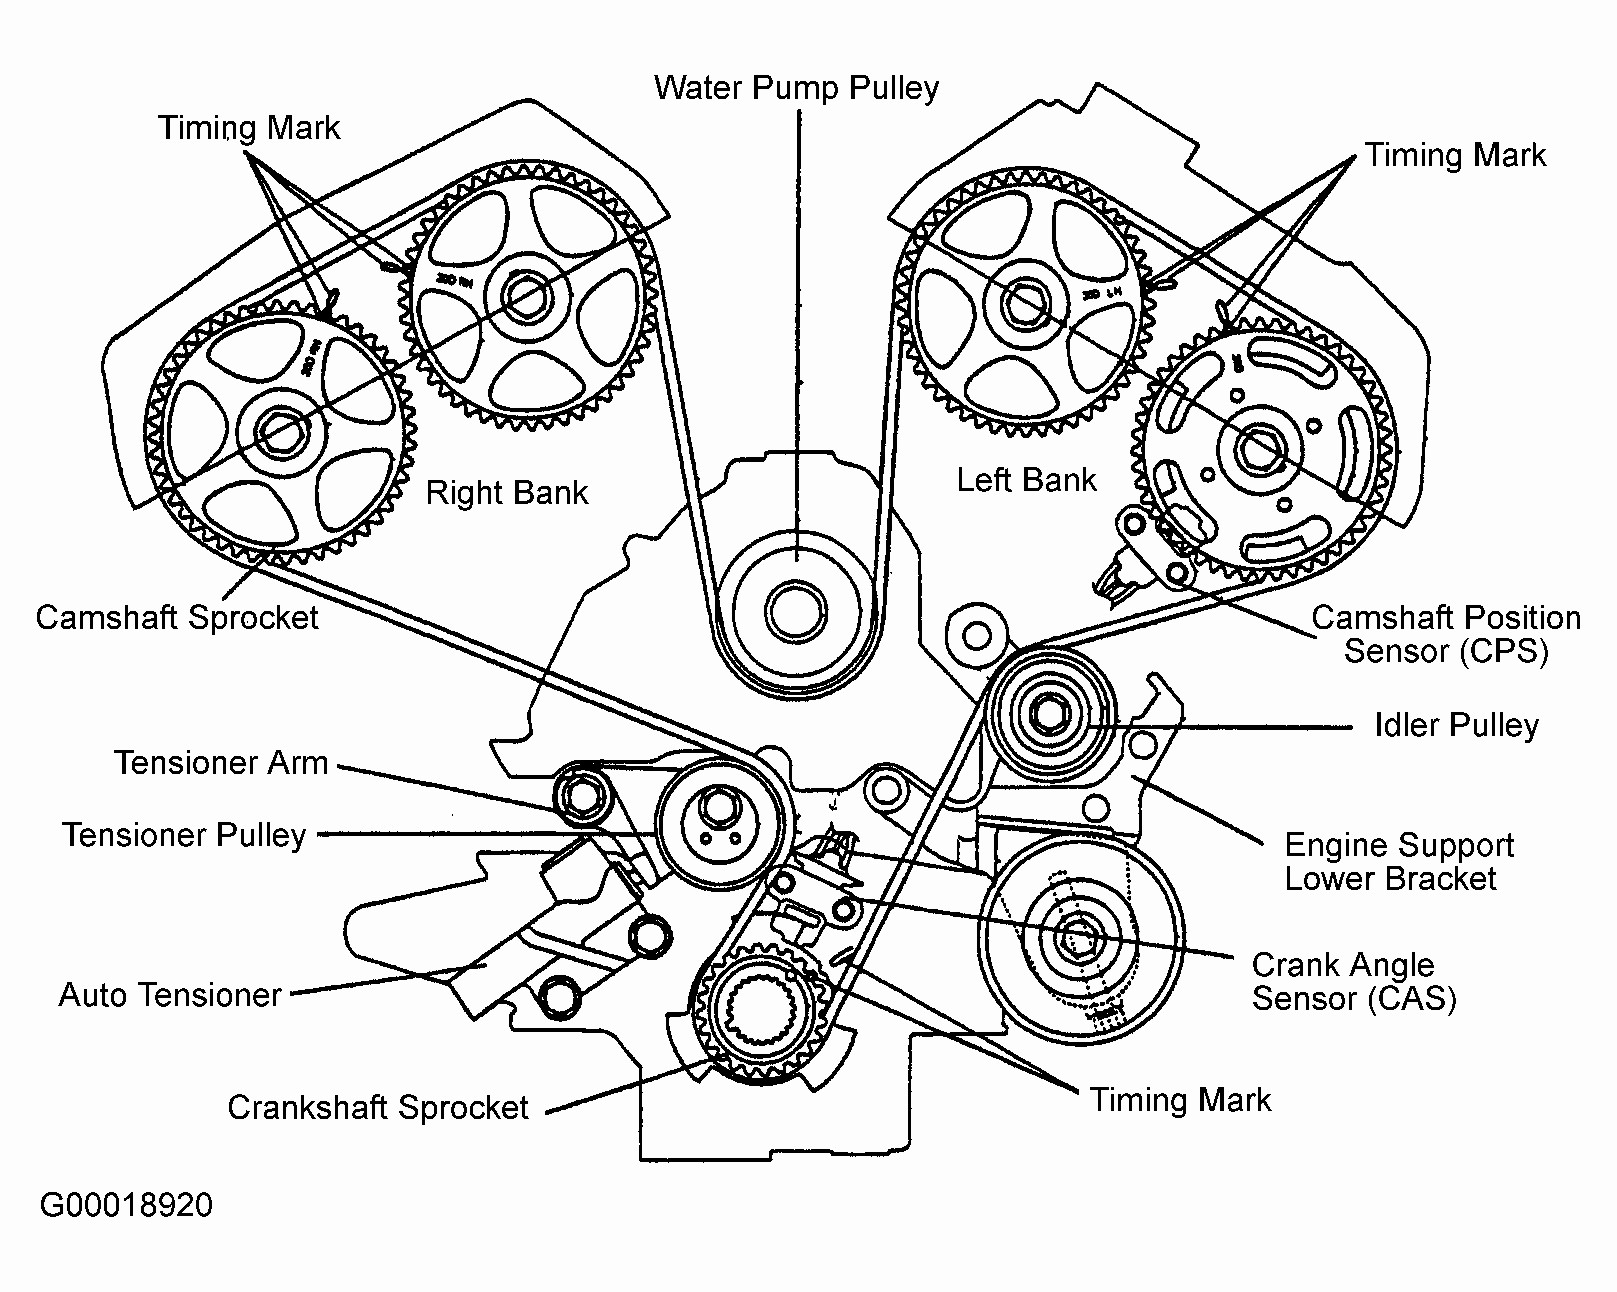 2004 Kia Amanti Engine Diagram 2004 Kia Amanti Engine Diagram Best I Need to Find the Ecm My Of 2004 Kia Amanti Engine Diagram